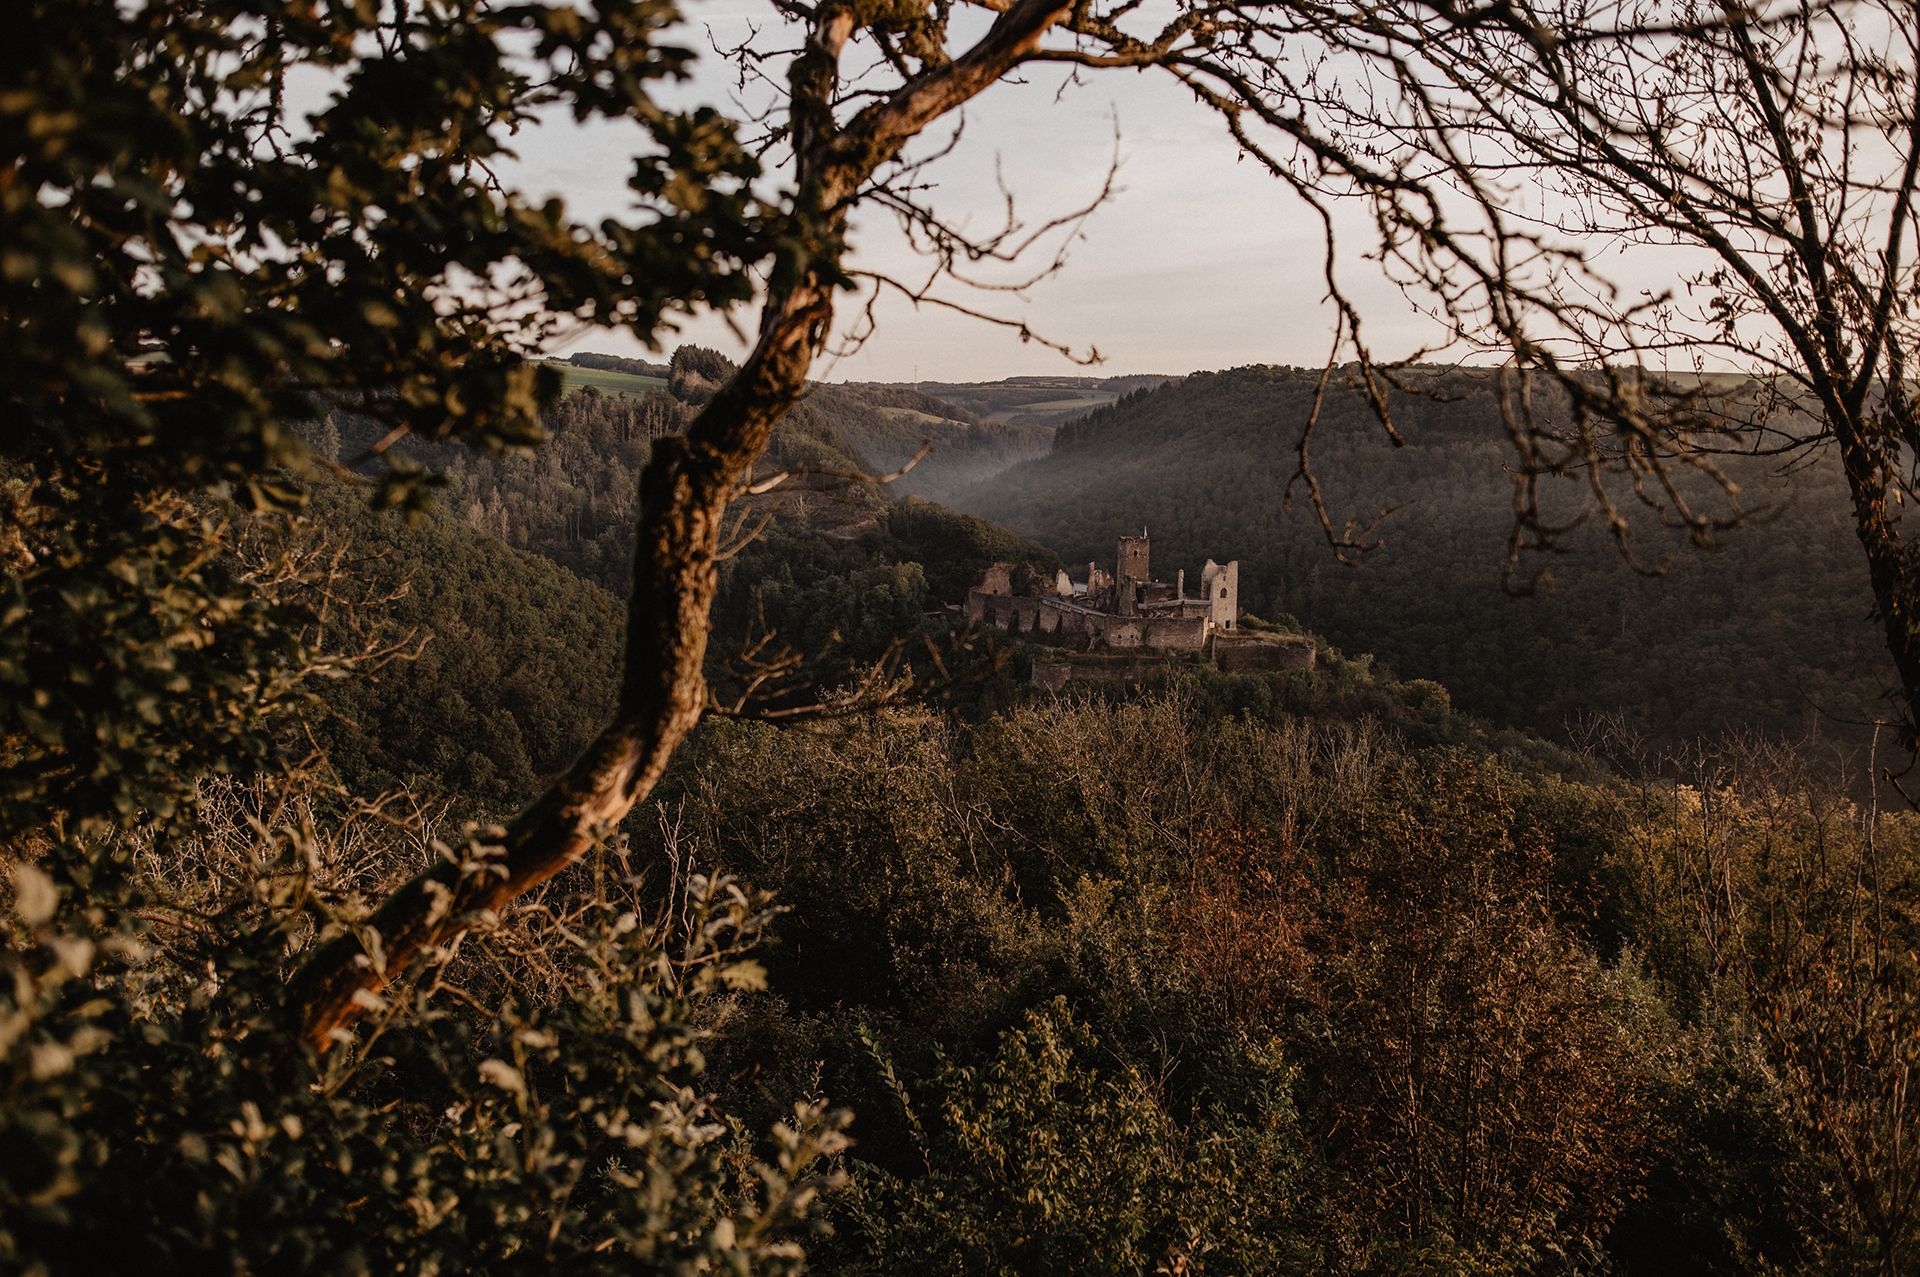 There is a viewpoint in the forest along a hiking trail in Vianden. From this point, you can see the Vianden Castle. The photo was taken at sunset.